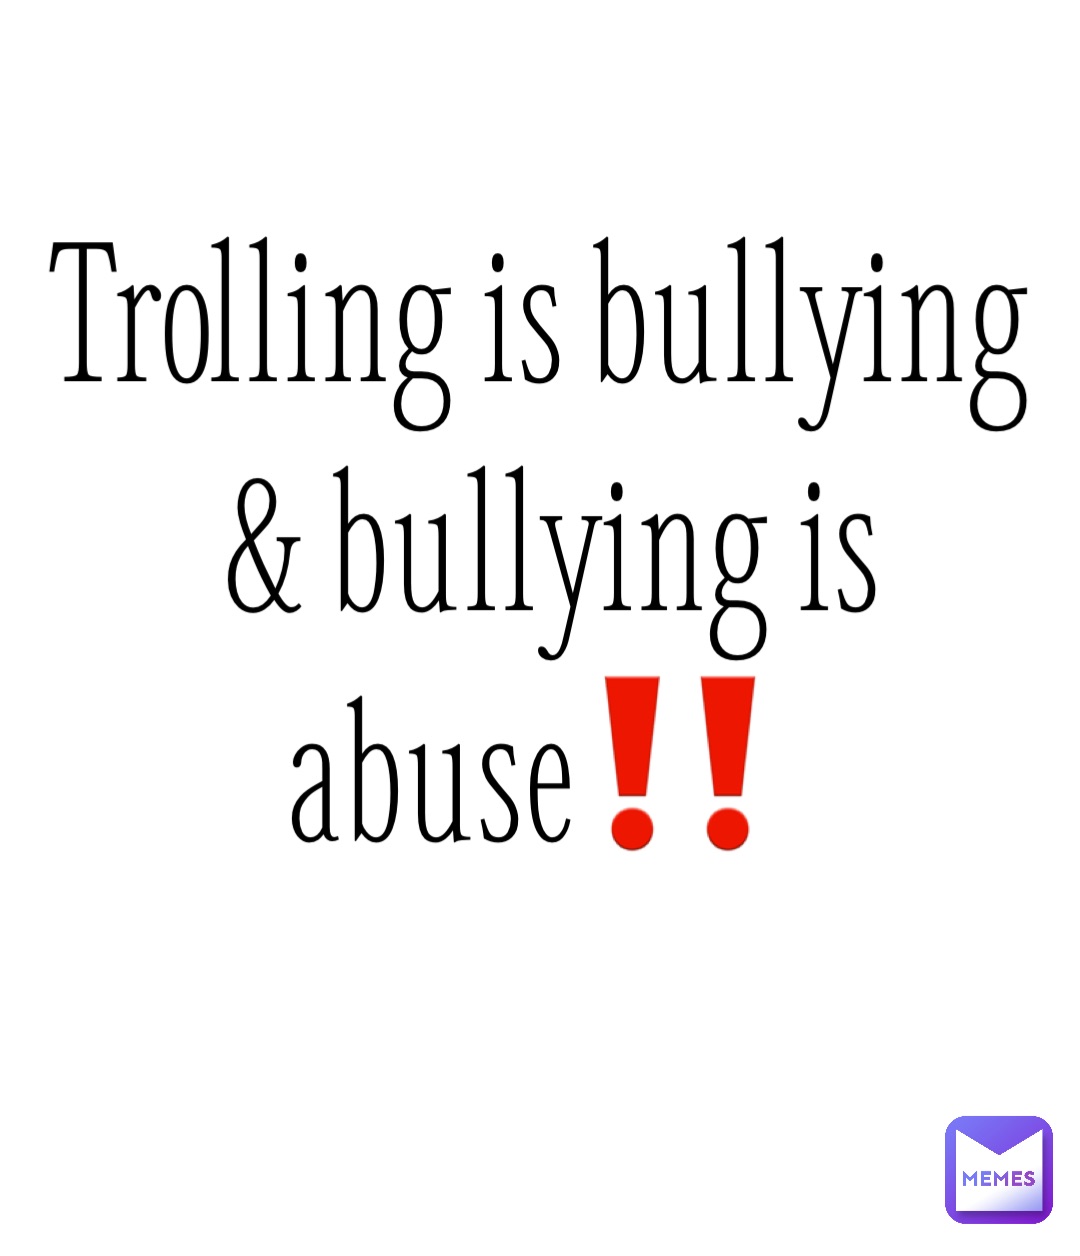 Trolling is bullying & bullying is abuse‼️